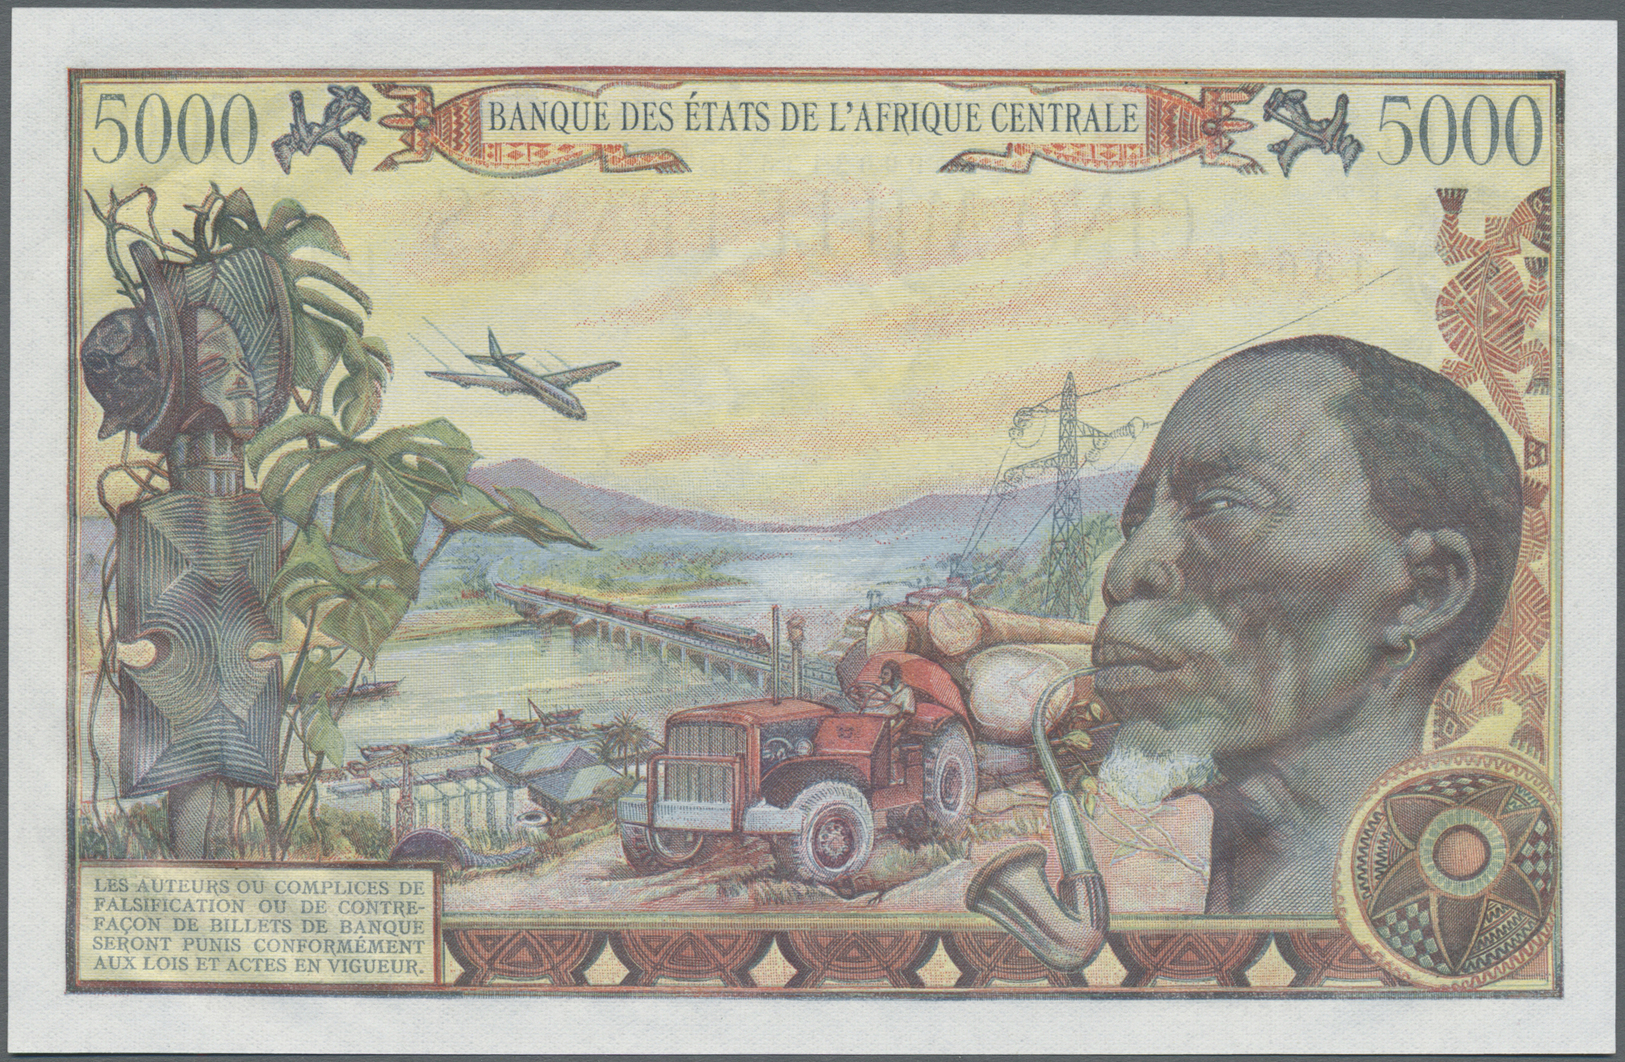 00526 Central African Republic / Zentralafrikanische Republik: 5000 Francs 1980 P. 11 With Only One Light Dint In Except - Central African Republic